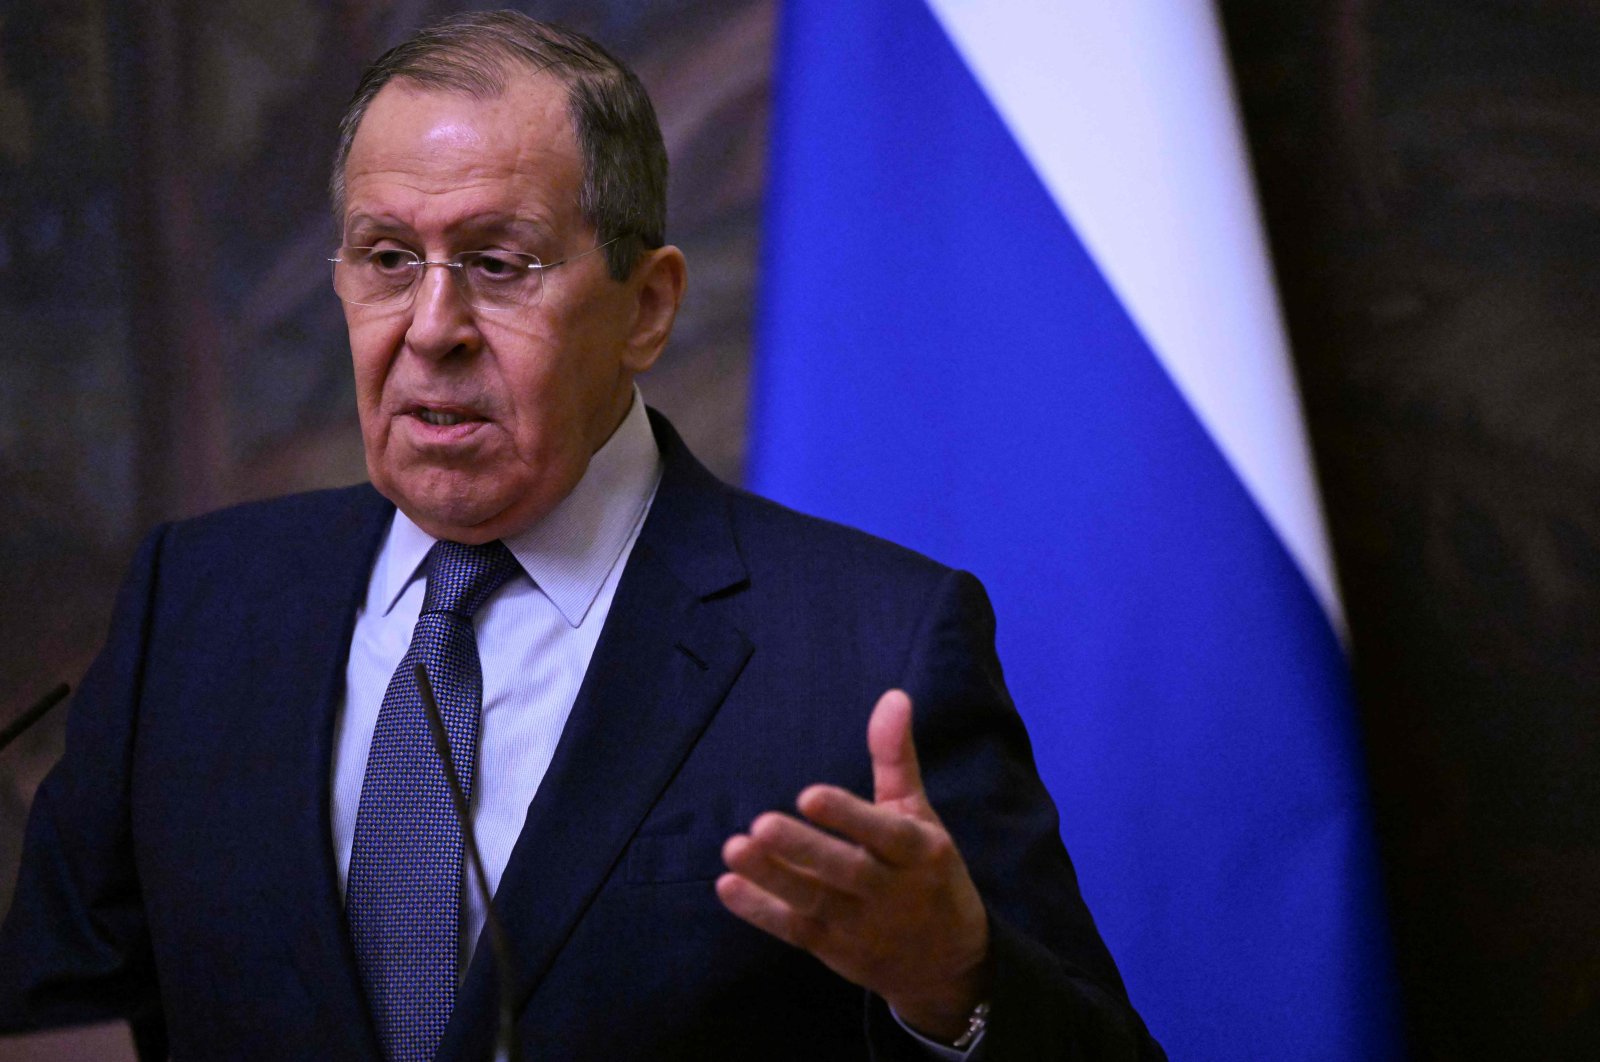 Russian Foreign Minister Sergey Lavrov attends a joint press conference with the president of the International Committee of the Red Cross (ICRC) (not pictured) following their talks in Moscow, Russia, March 24, 2022. (AFP File Photo)